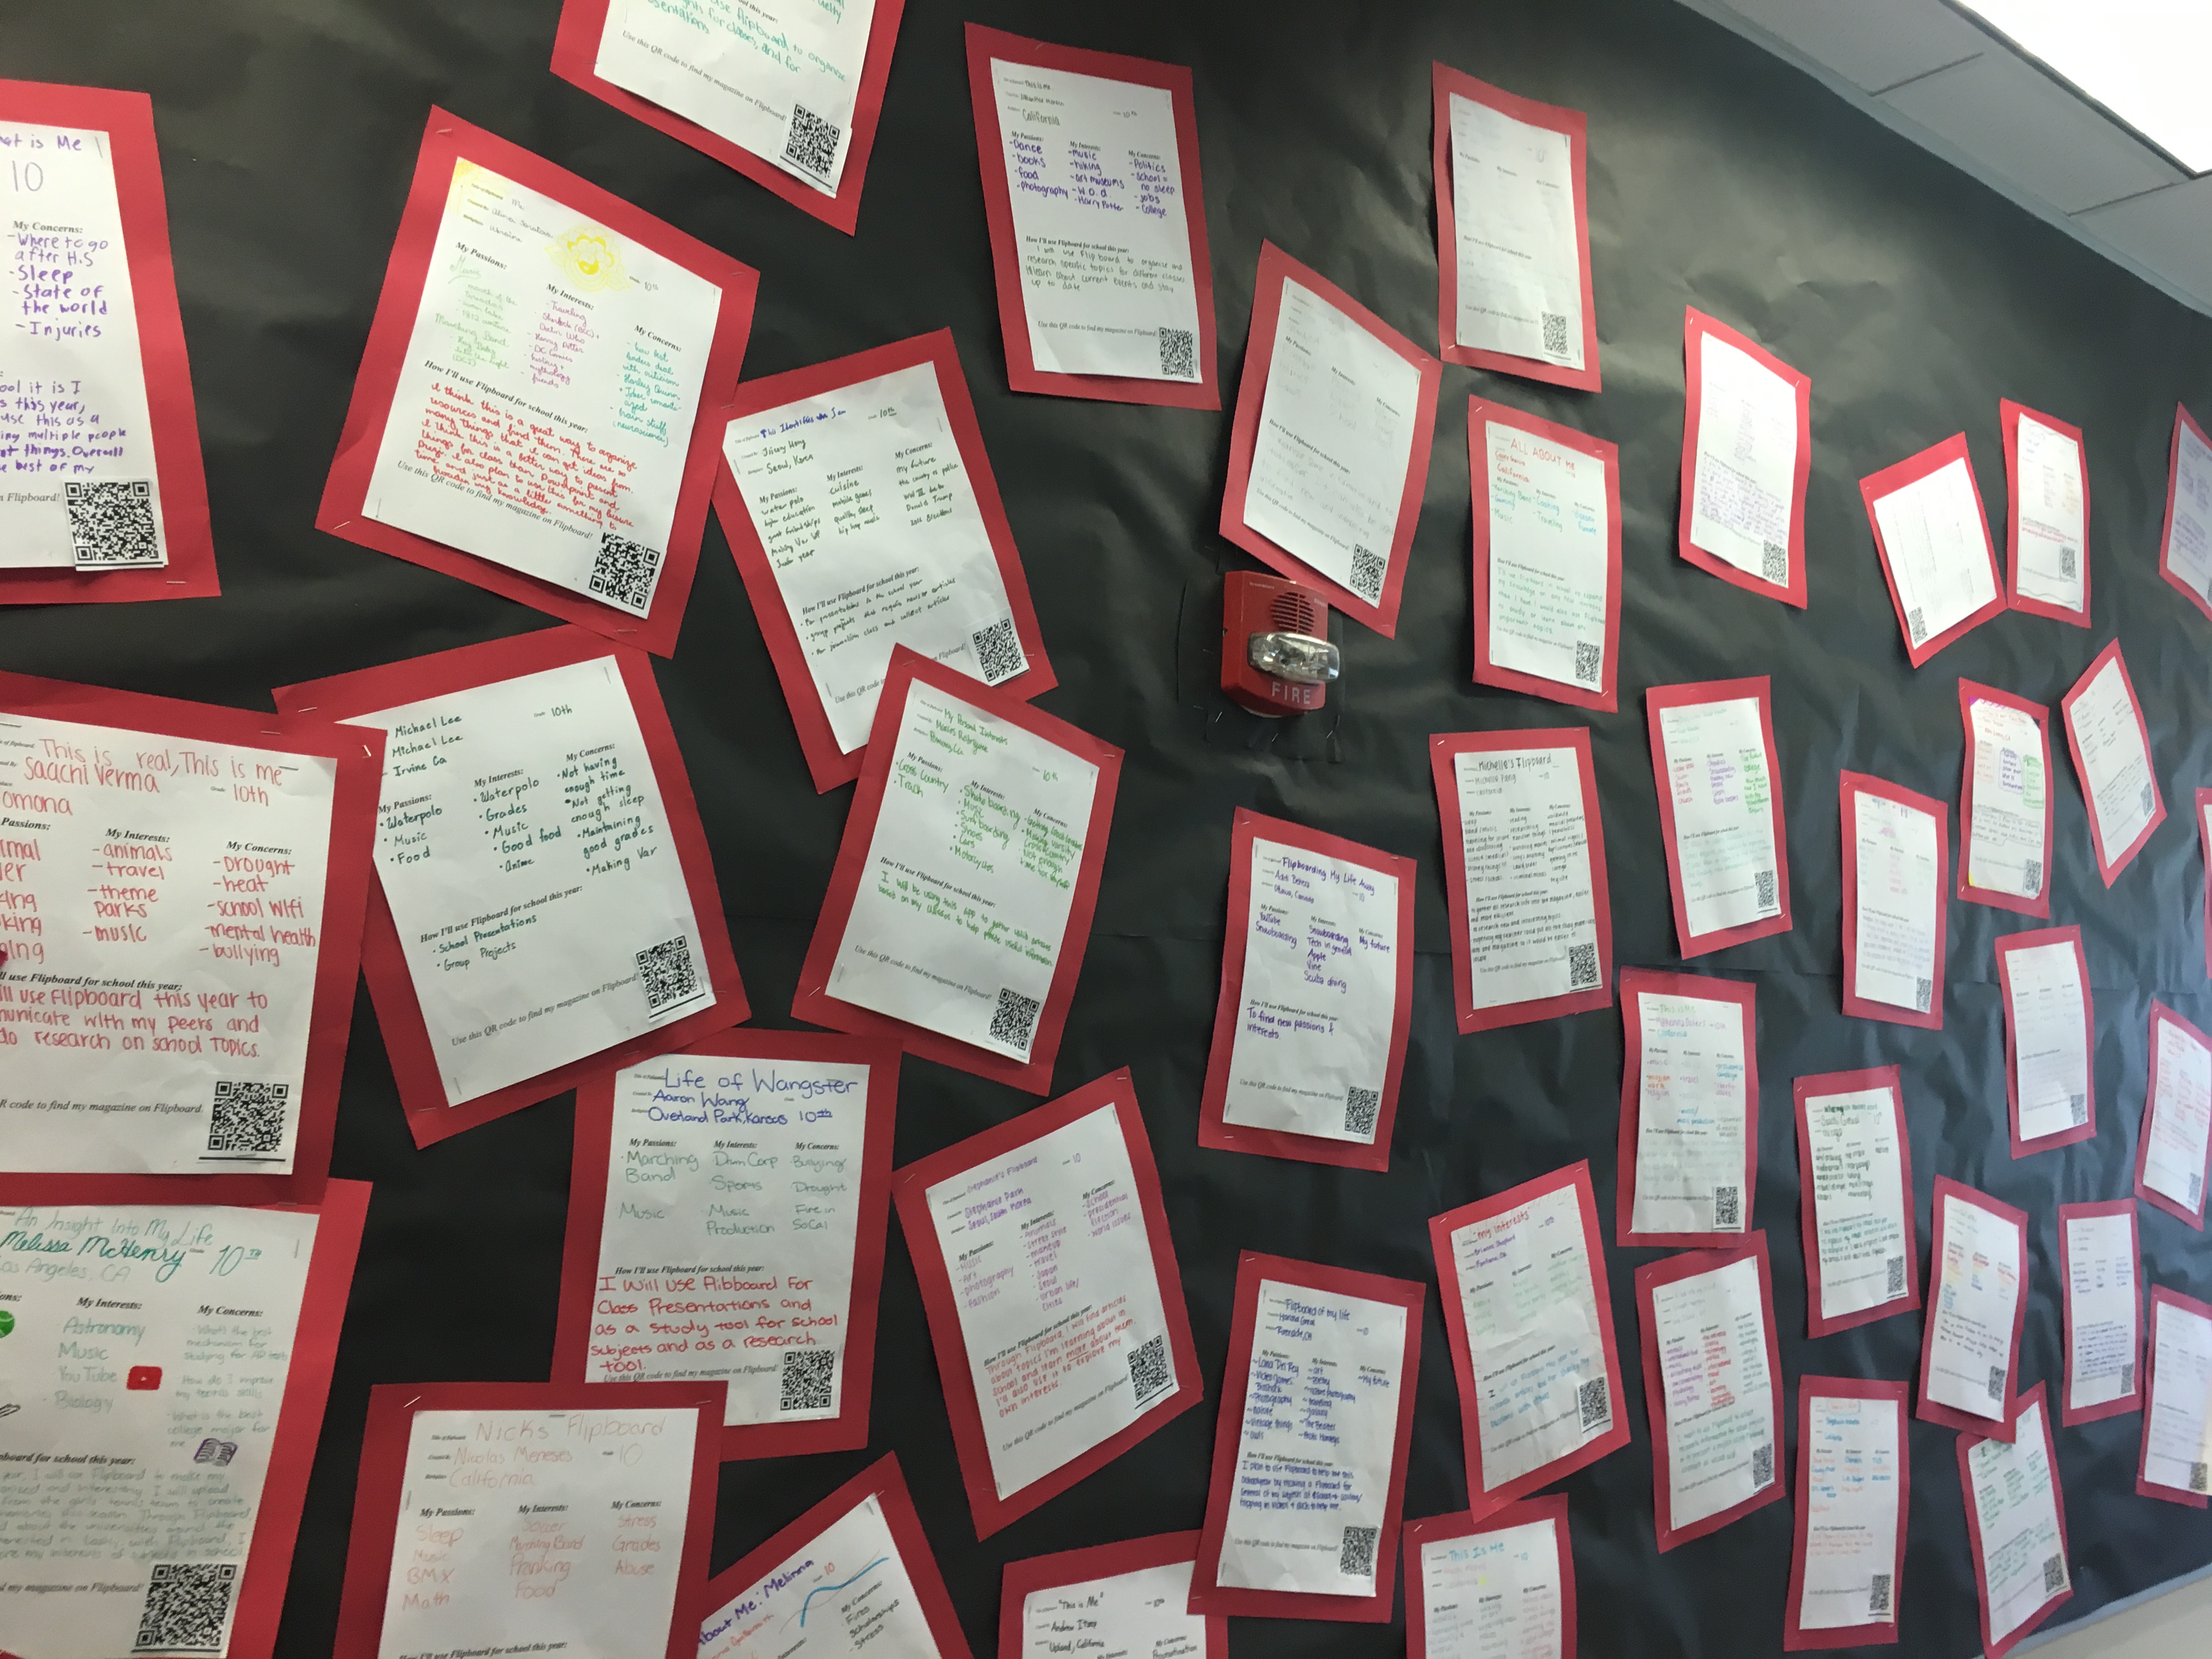 Wall of student introductions, "WHO I AM” with a QR code to their Flipboard Magazines. This is how Mr. Weidman's students get to know each other. 